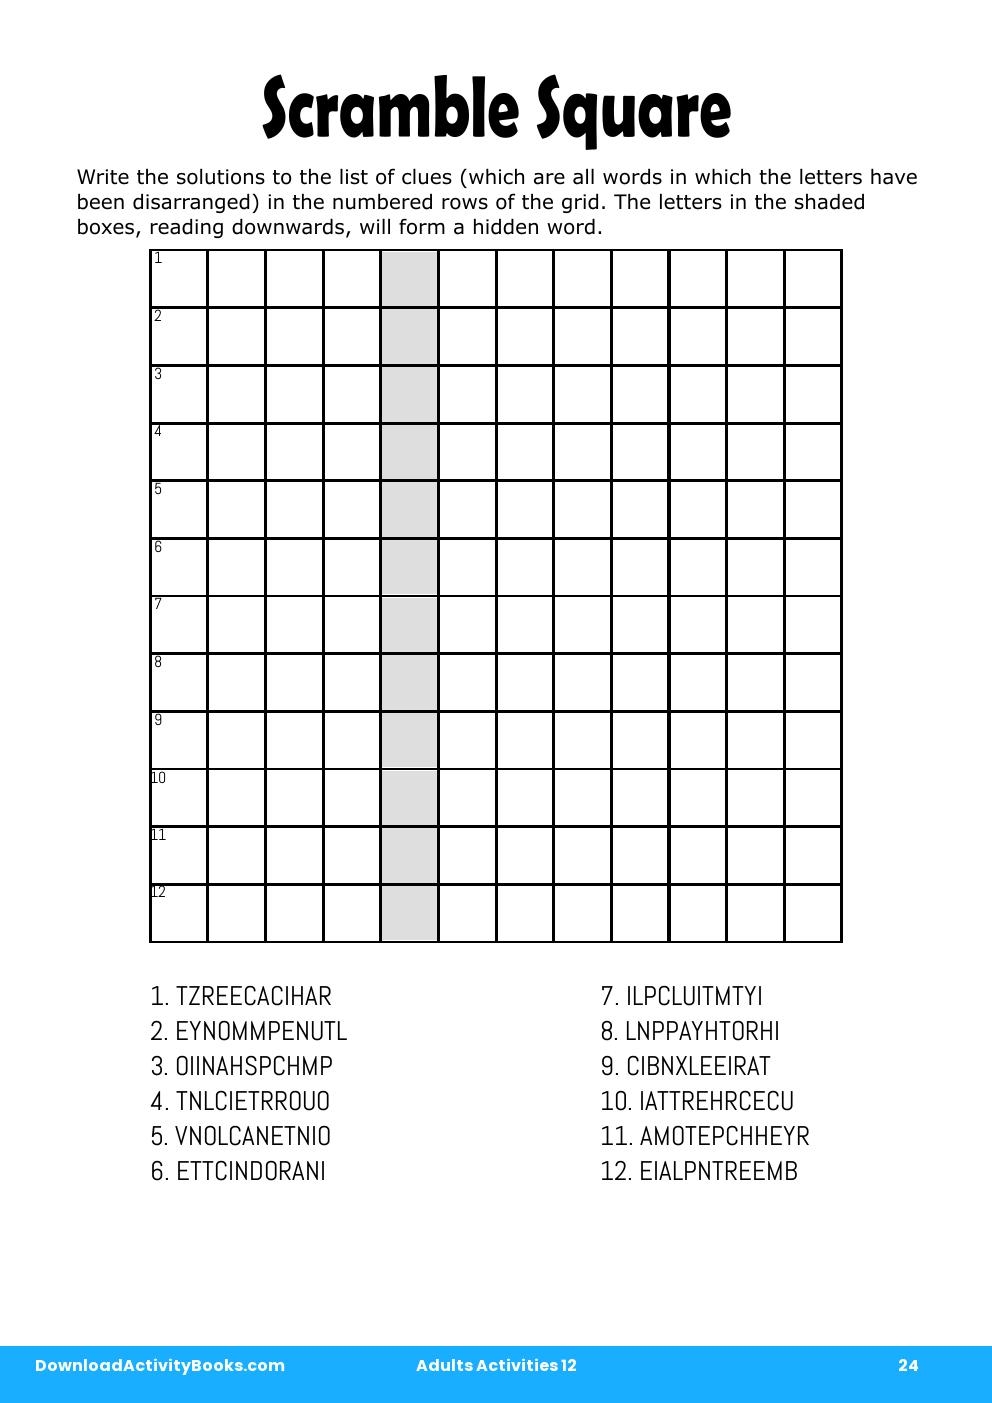 Scramble Square in Adults Activities 12